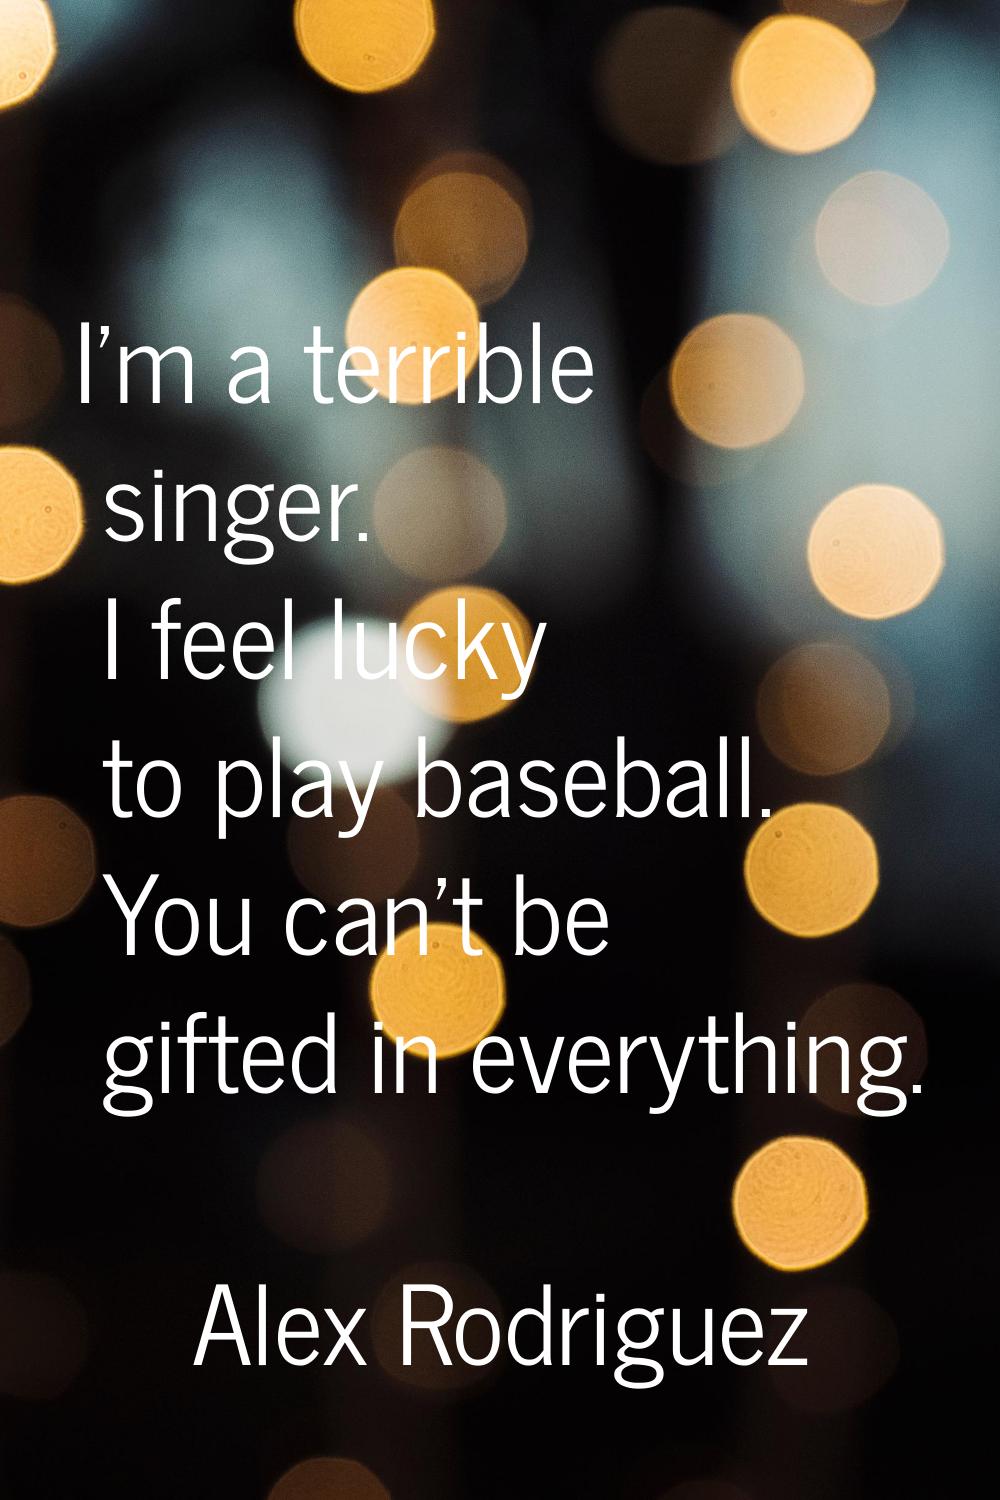 I'm a terrible singer. I feel lucky to play baseball. You can't be gifted in everything.